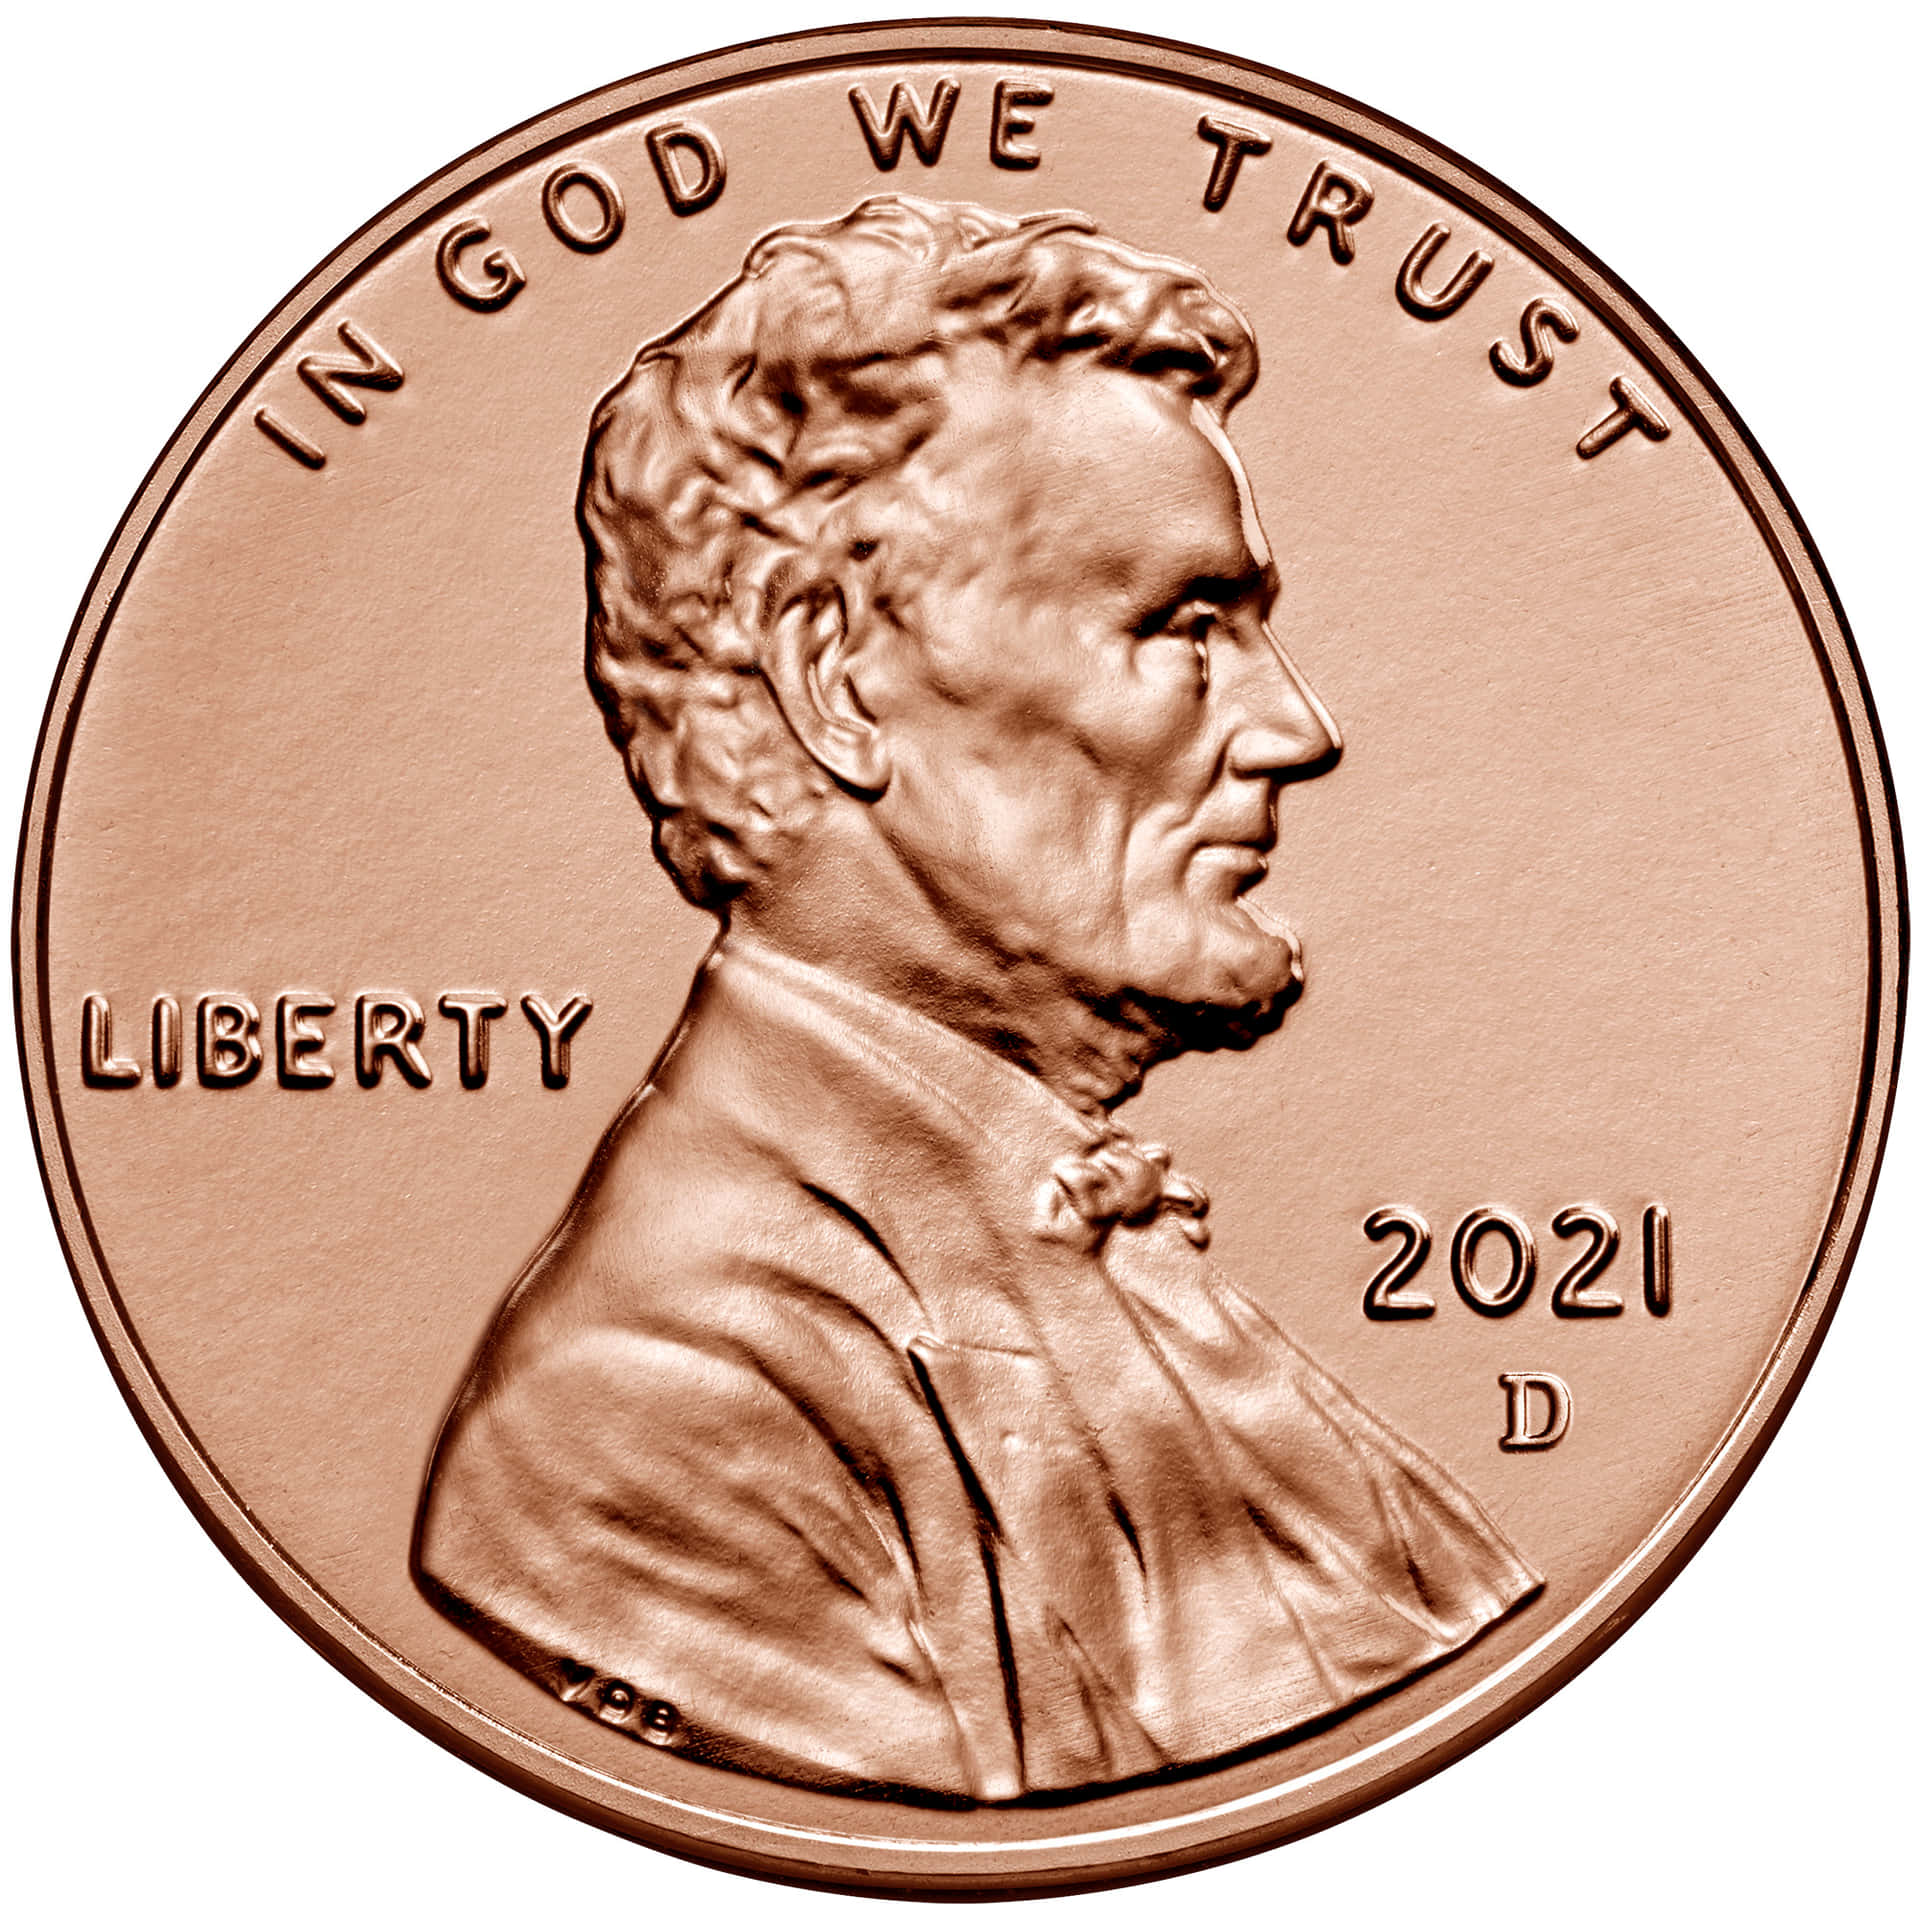 A Copper Coin With A Portrait Of Abraham Lincoln